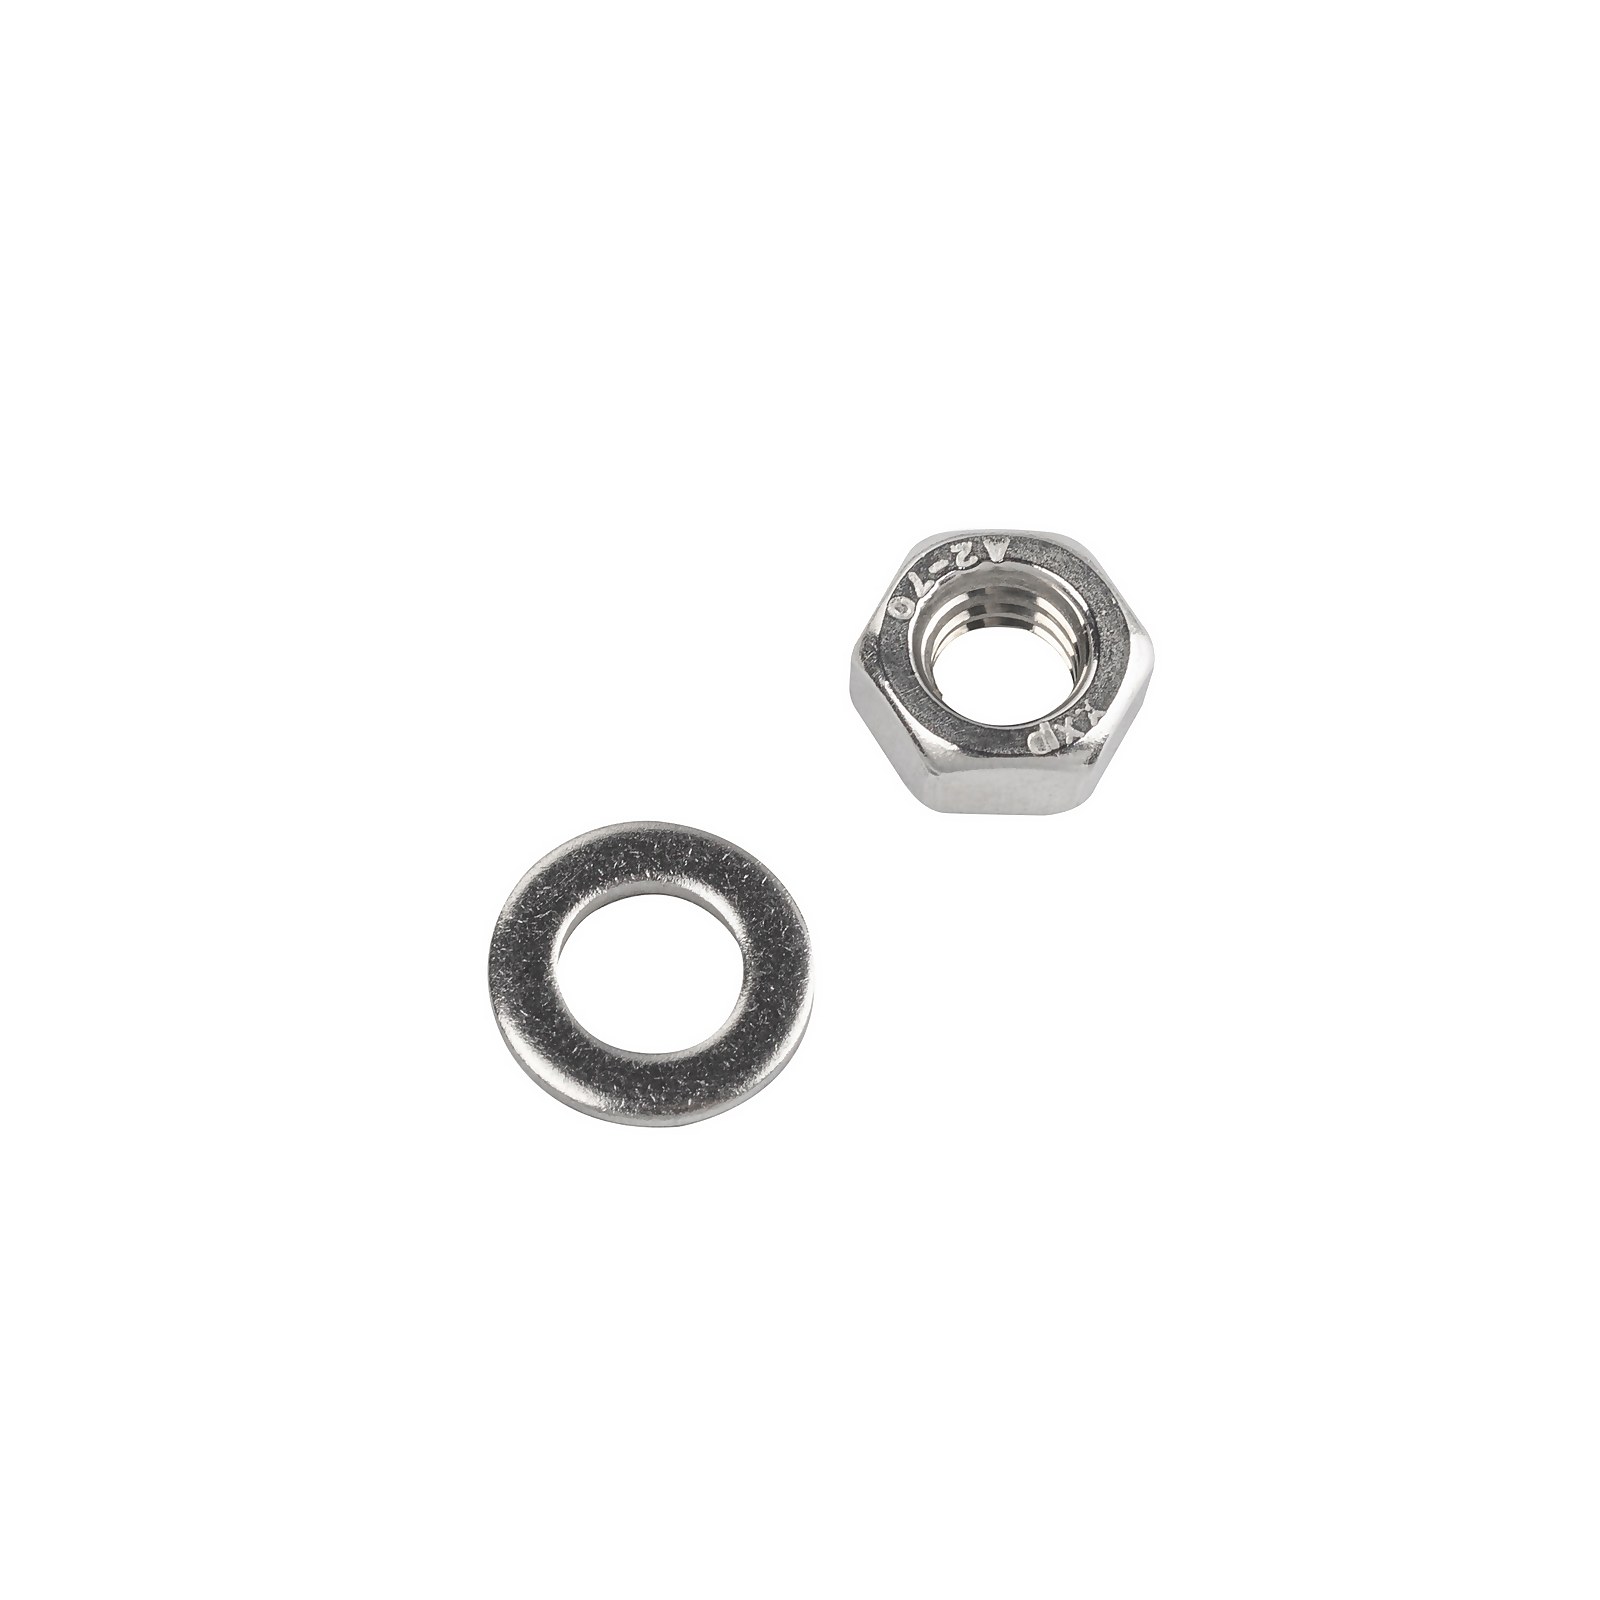 Photo of Homebase Stainless Steel Hex Nut & Washer M6 5 Pack